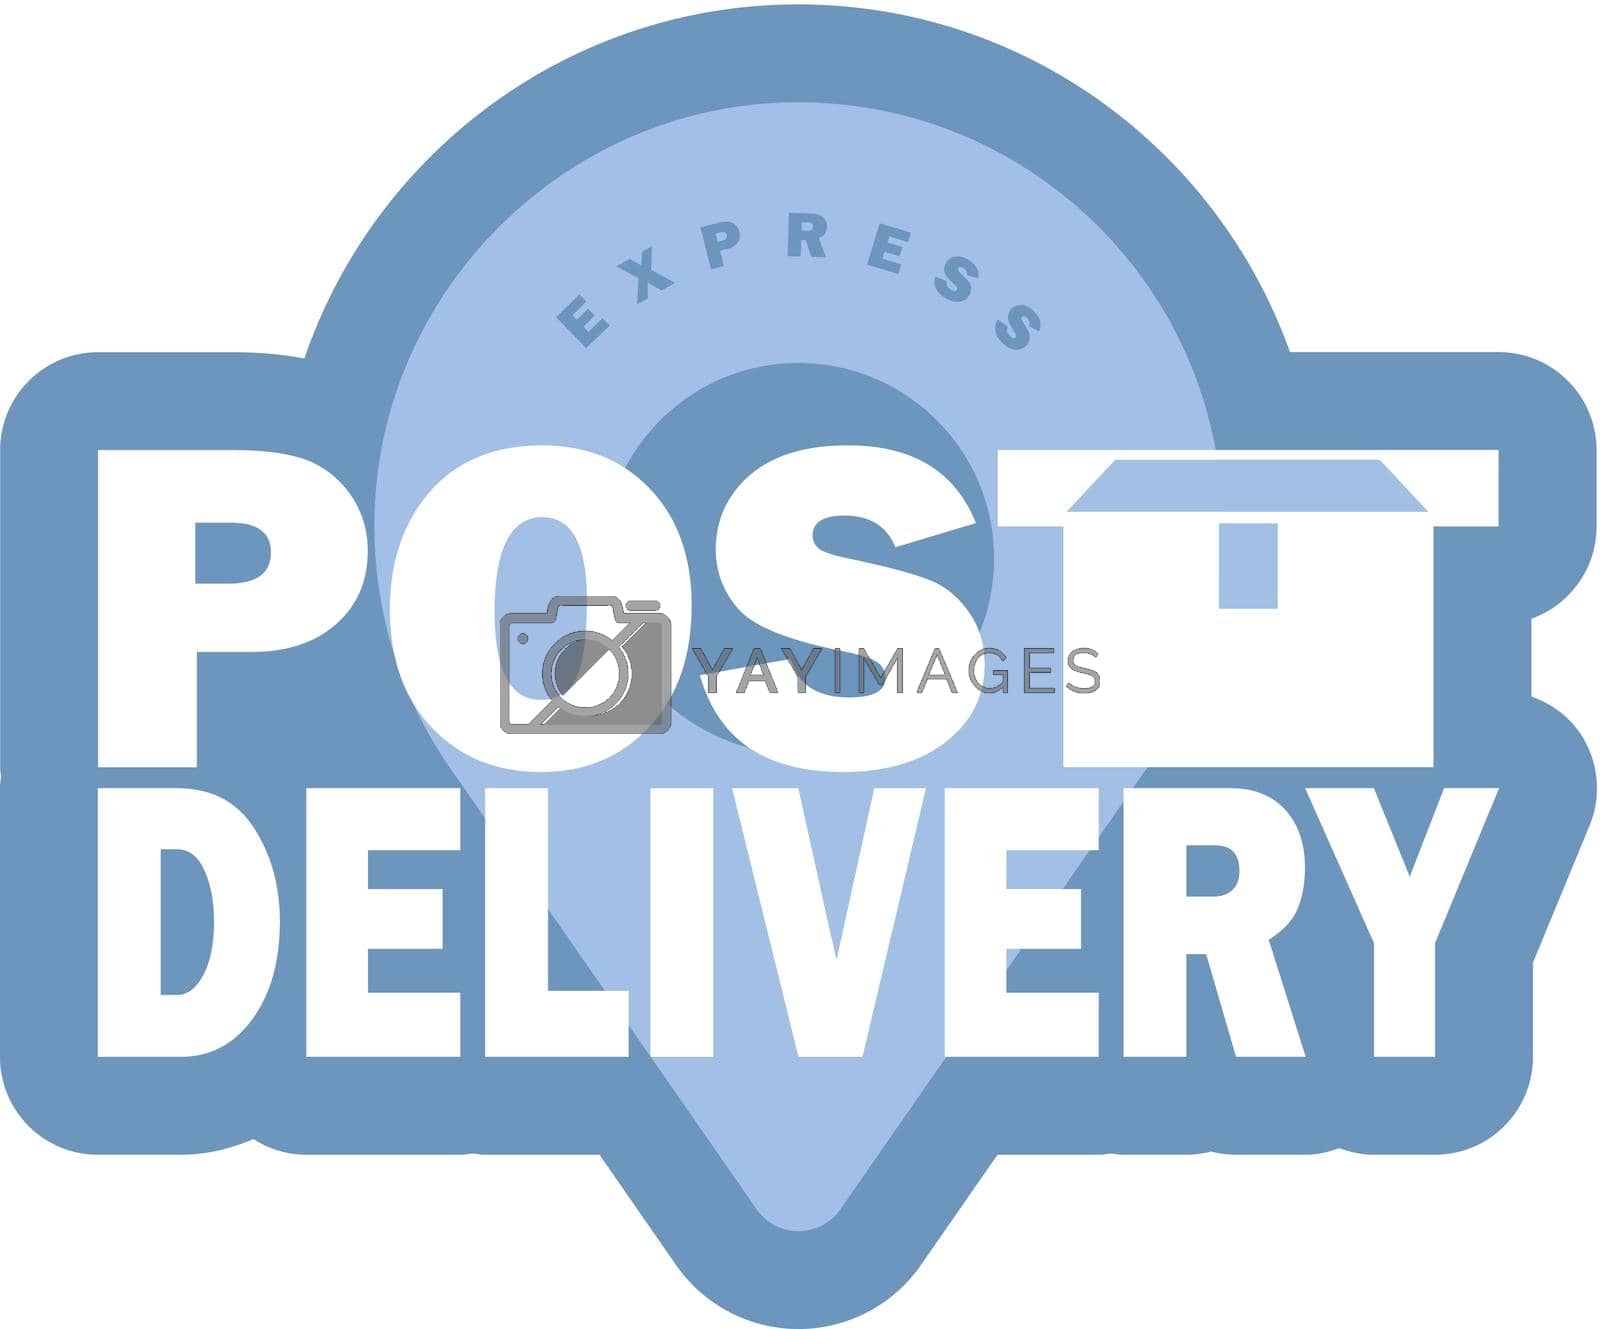 Royalty free image of Postal delivery logo. Cartoon style. Vector illustration. Isolated. by Javvani